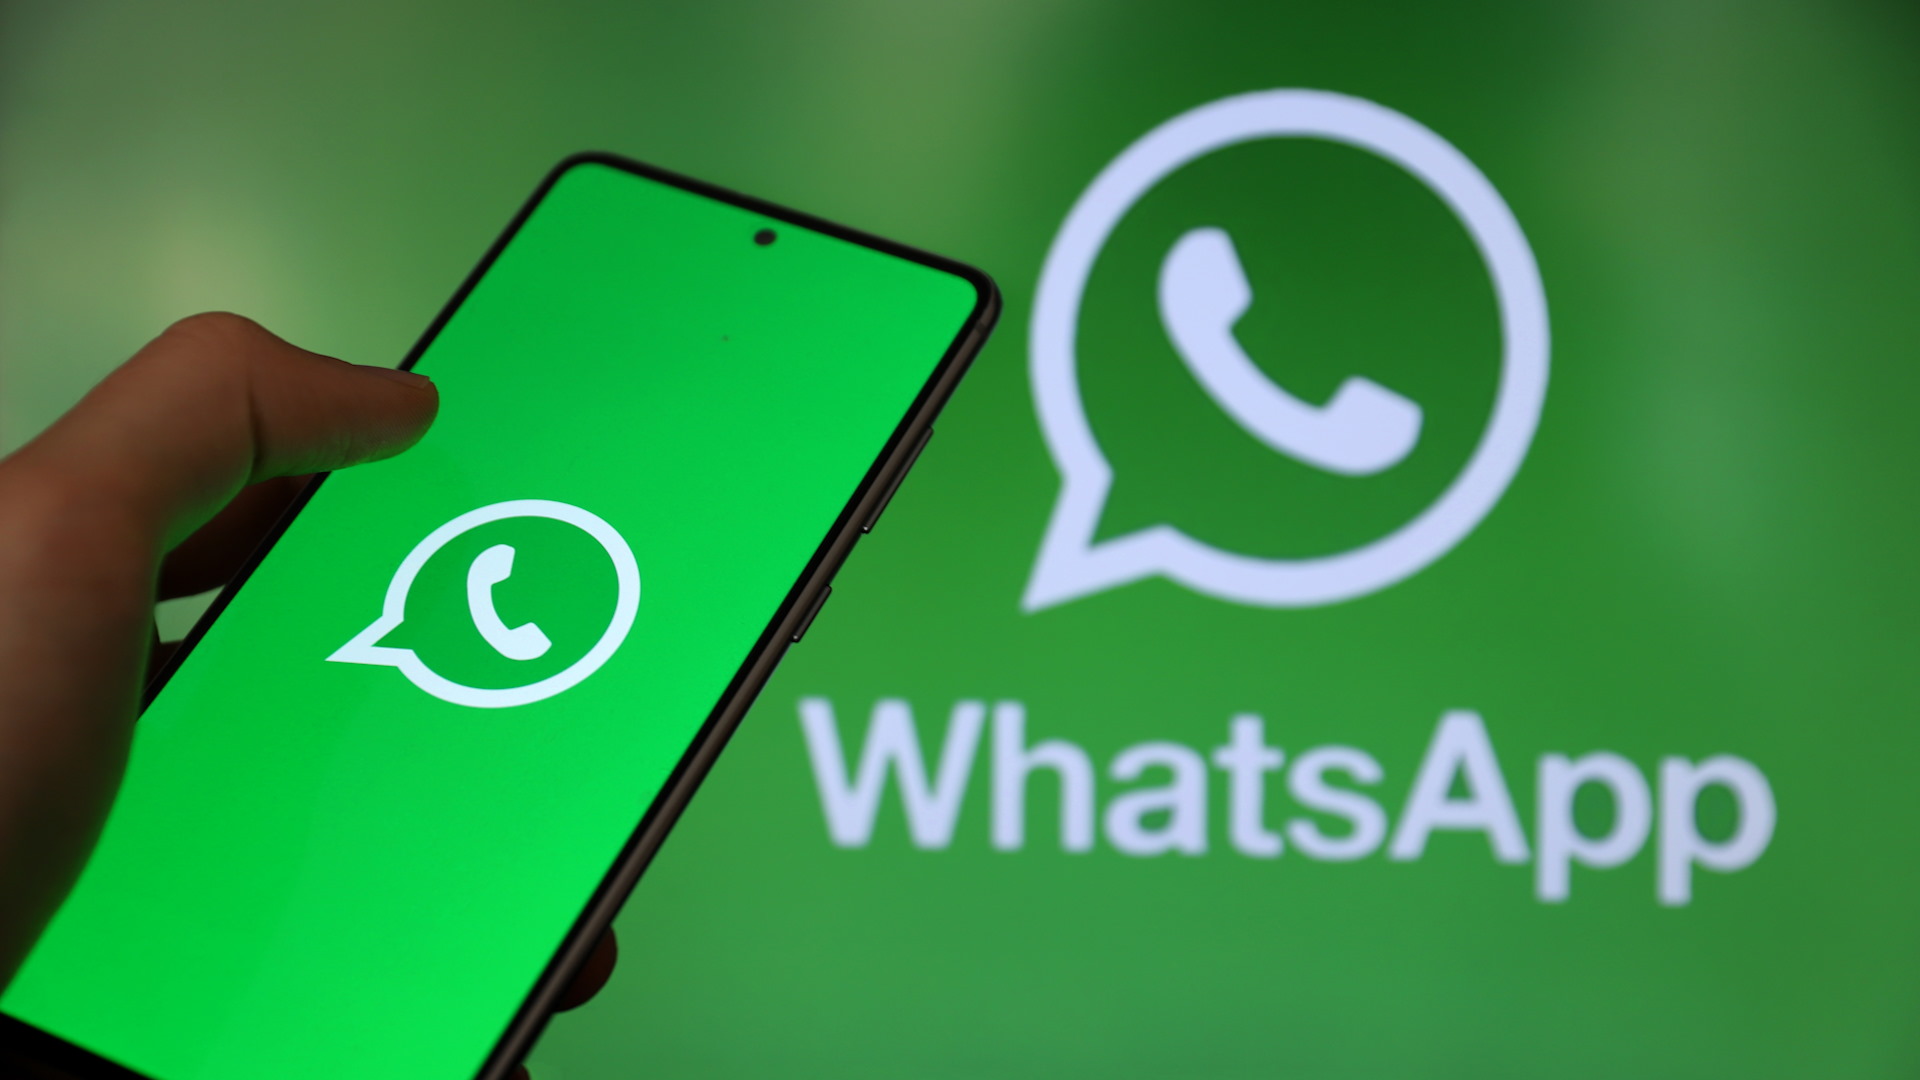 WhatsApp Plans to Enable Screen Sharing for Collaborative Video Watching and Music Listening